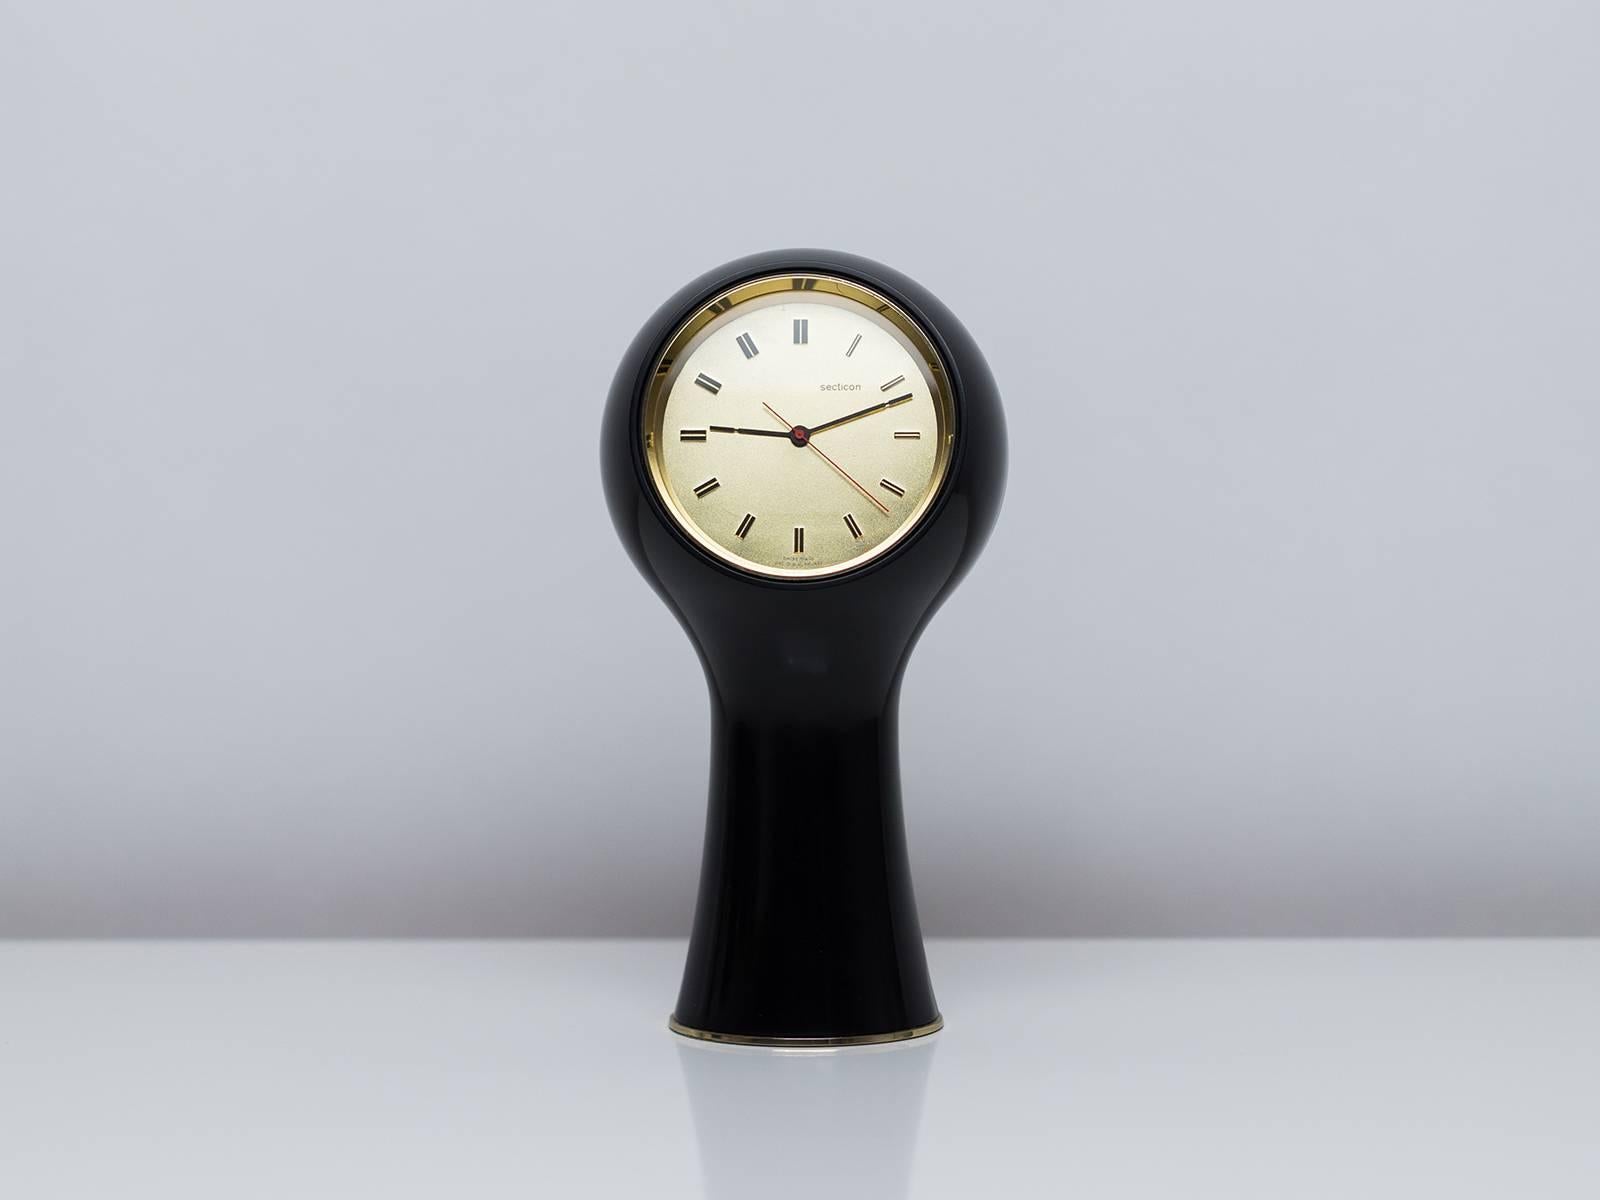 An iconic clock design that made Angelo Mangiarotti famous the world over. The elegant injection-molded shell holds a beautifully-designed face that is positioned at an ideal angle in relation to the eye. The Secticon T1 is the table version of the